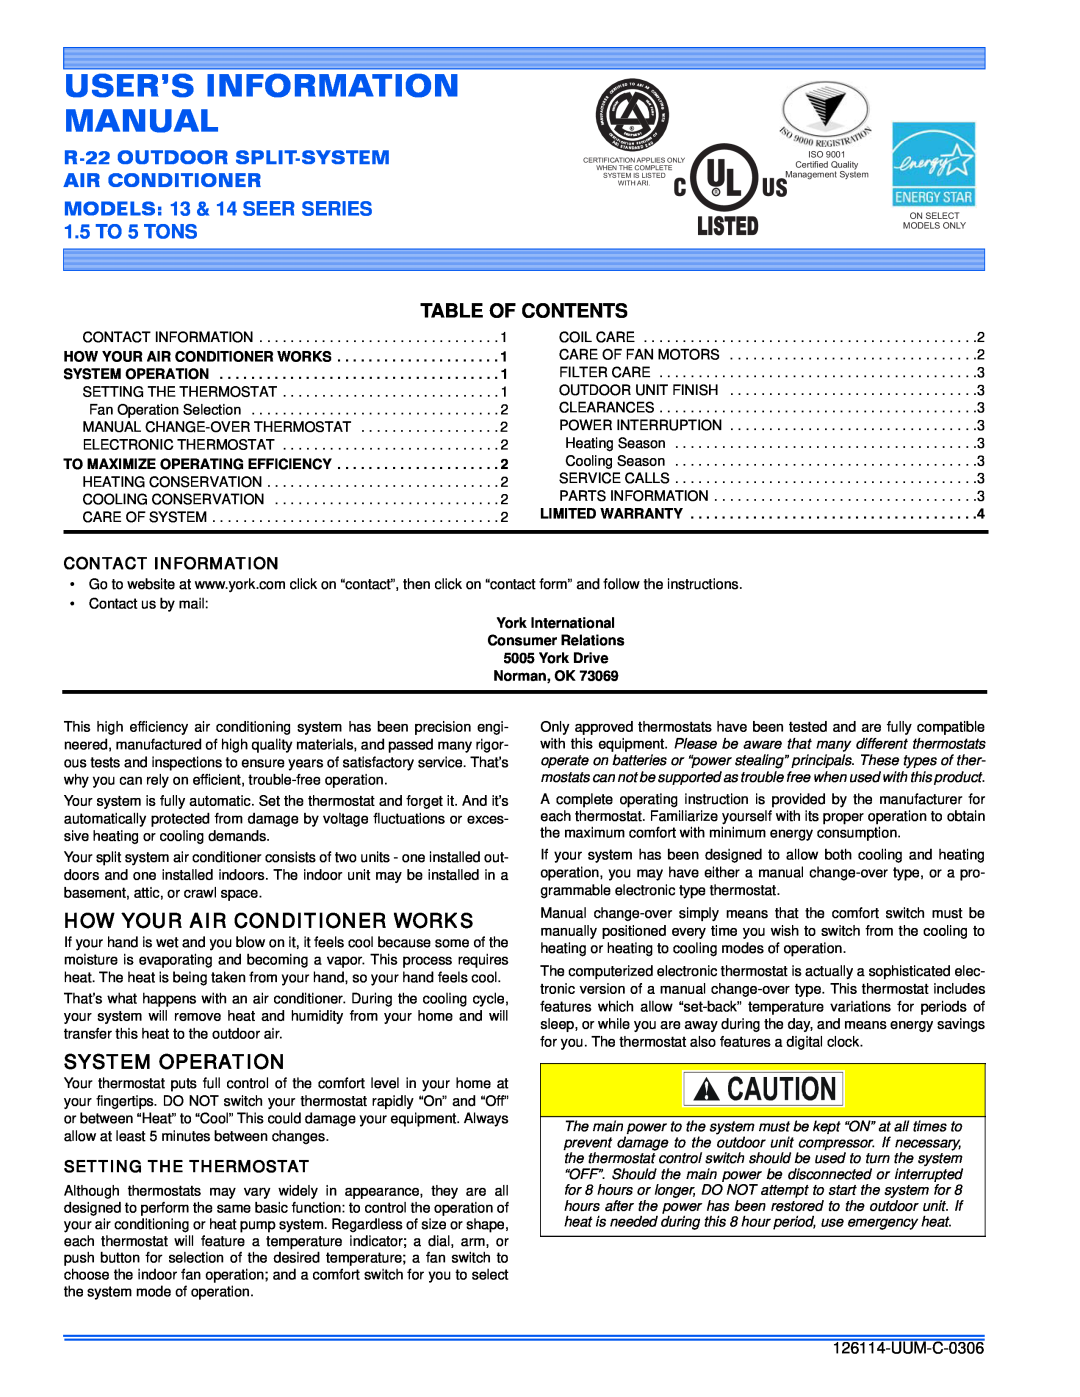 York R-22 warranty Table Of Contents, How Your Air Conditioner Works, System Operation, Contact Information, UUM-C-0306 